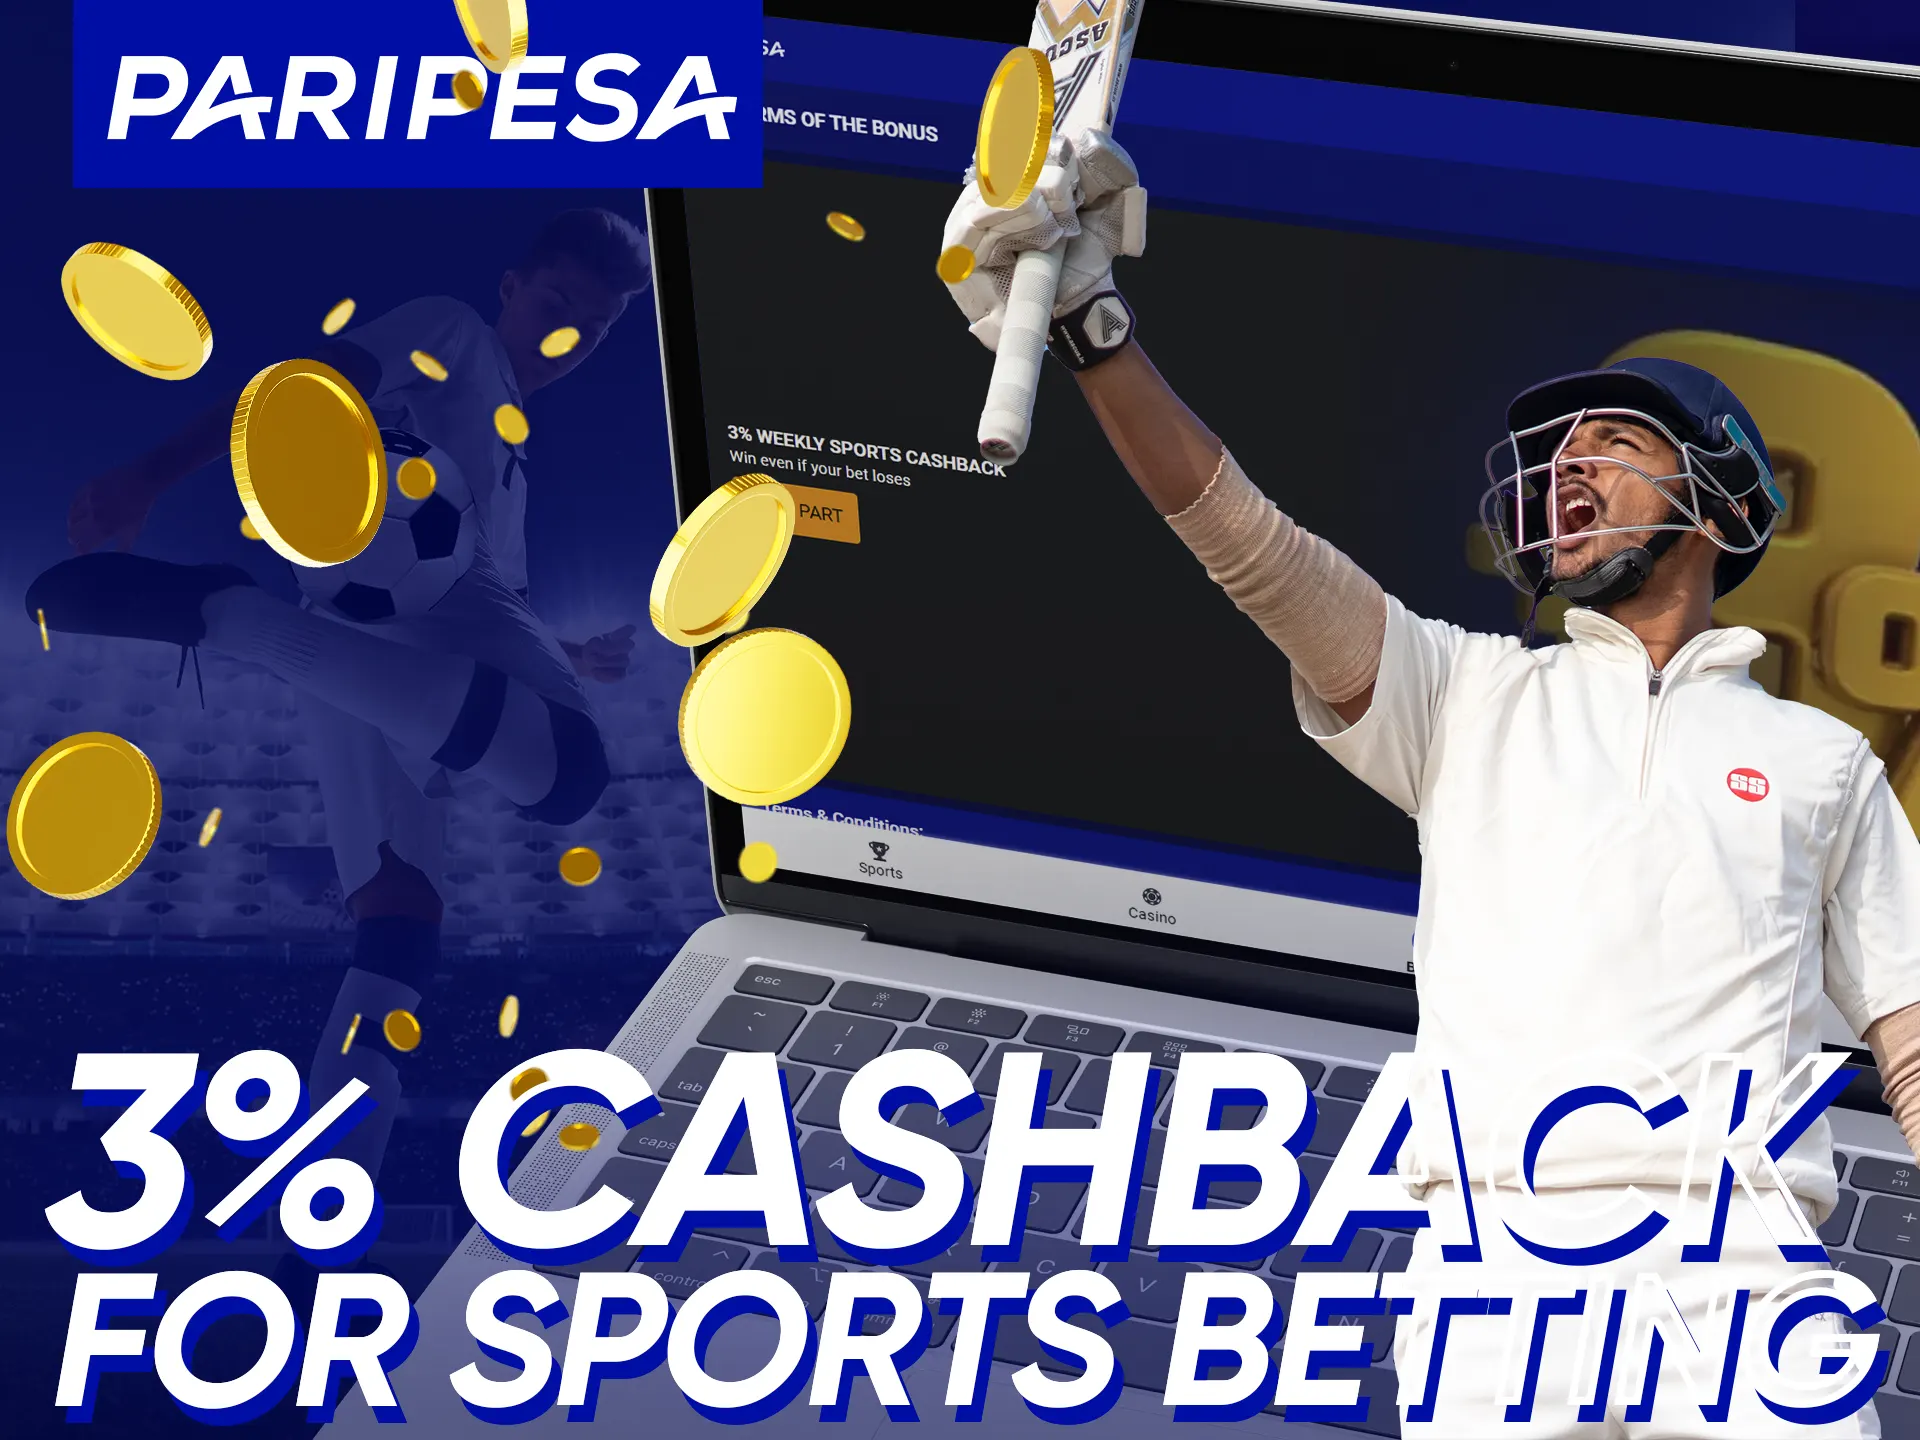 Get 3% Cashback every thursday on sports bets at Paripesa.